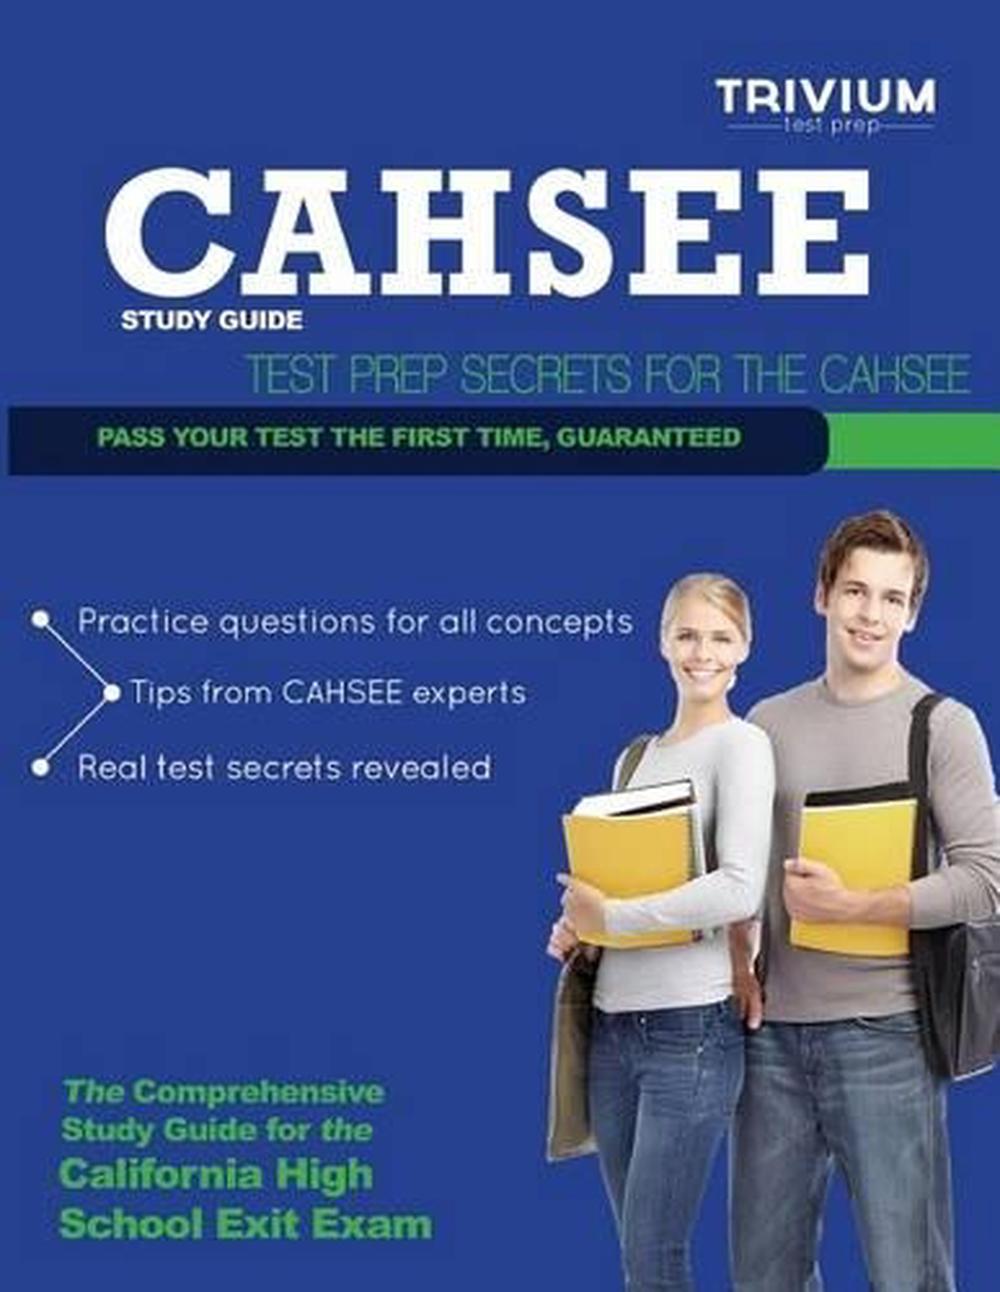 cahsee-study-guide-test-prep-secrets-for-the-cahsee-by-trivium-test-prep-engli-9780615832883